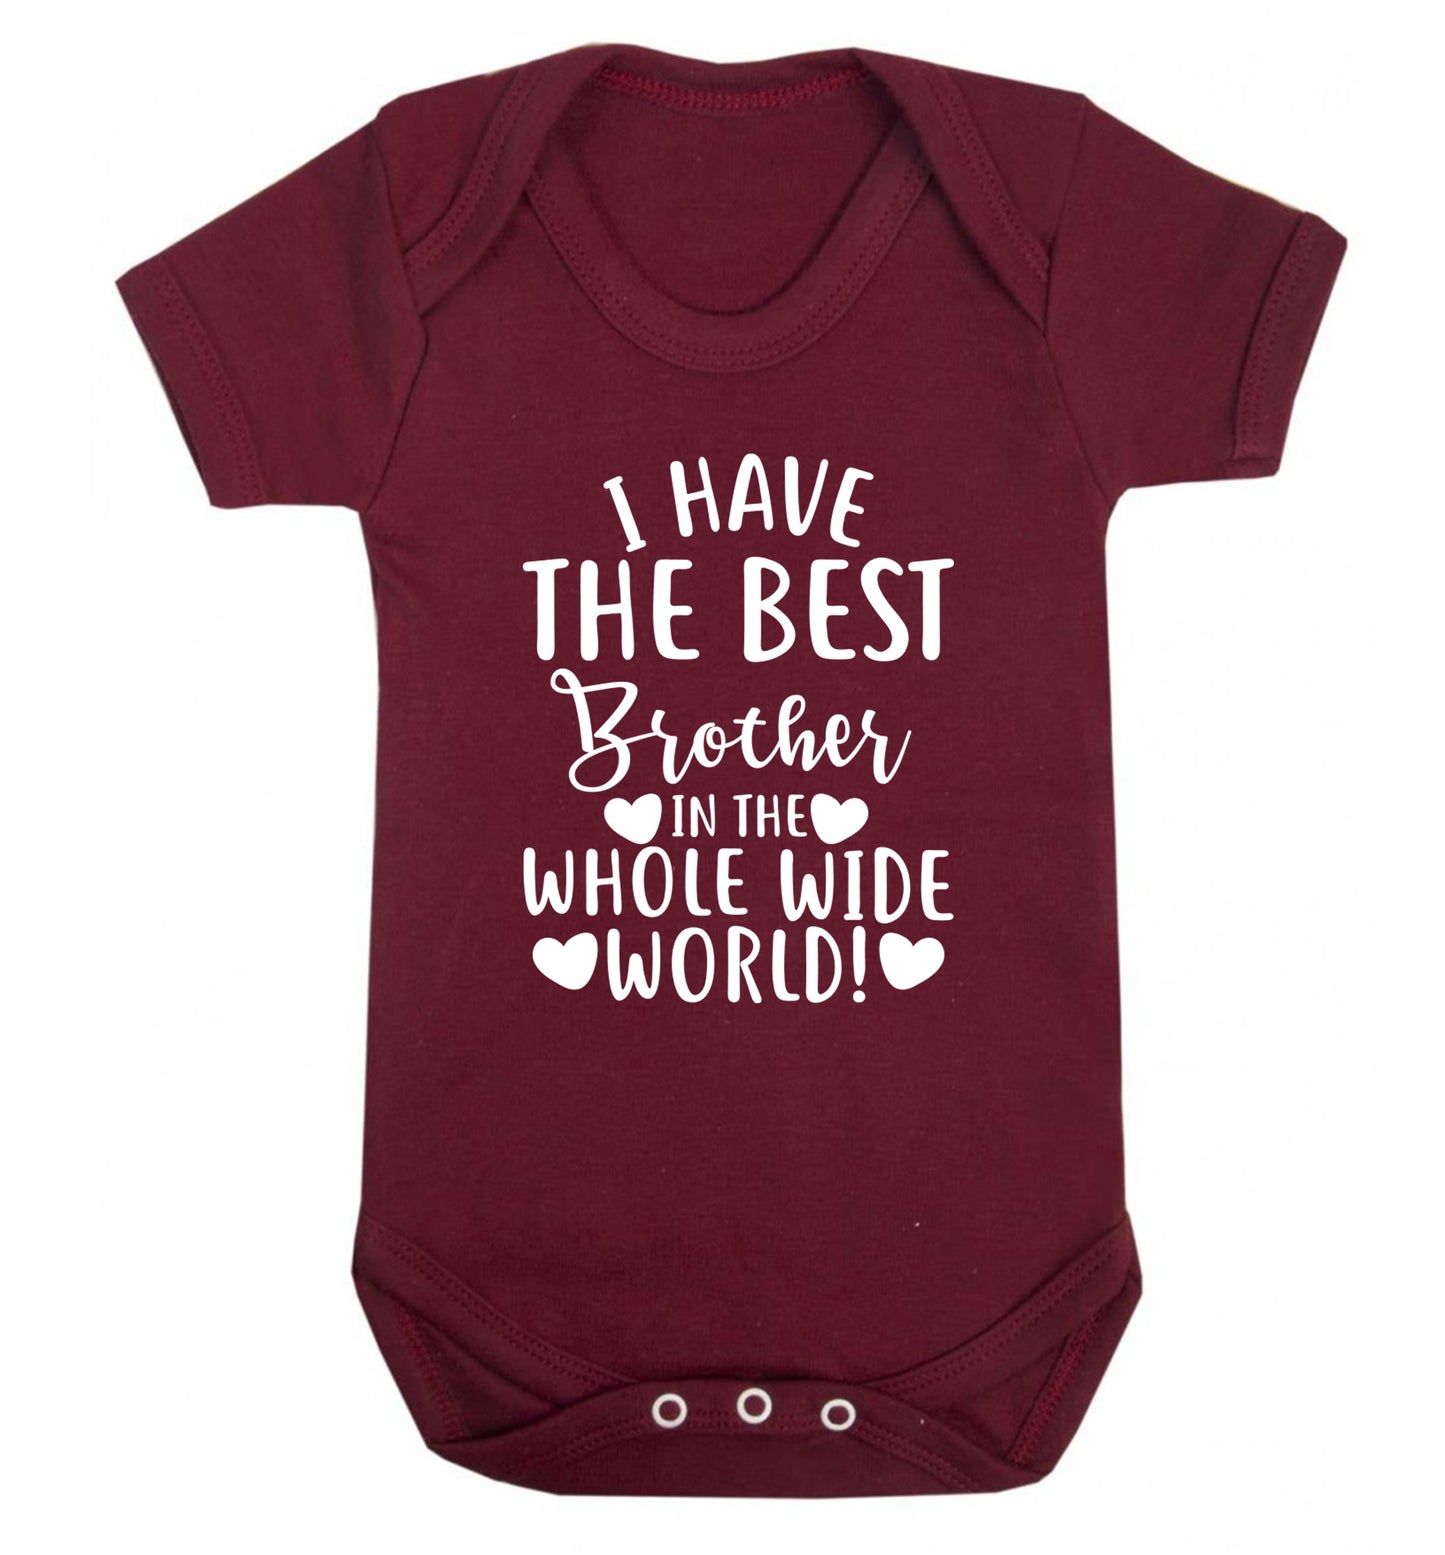 I have the best brother in the whole wide world! Baby Vest maroon 18-24 months